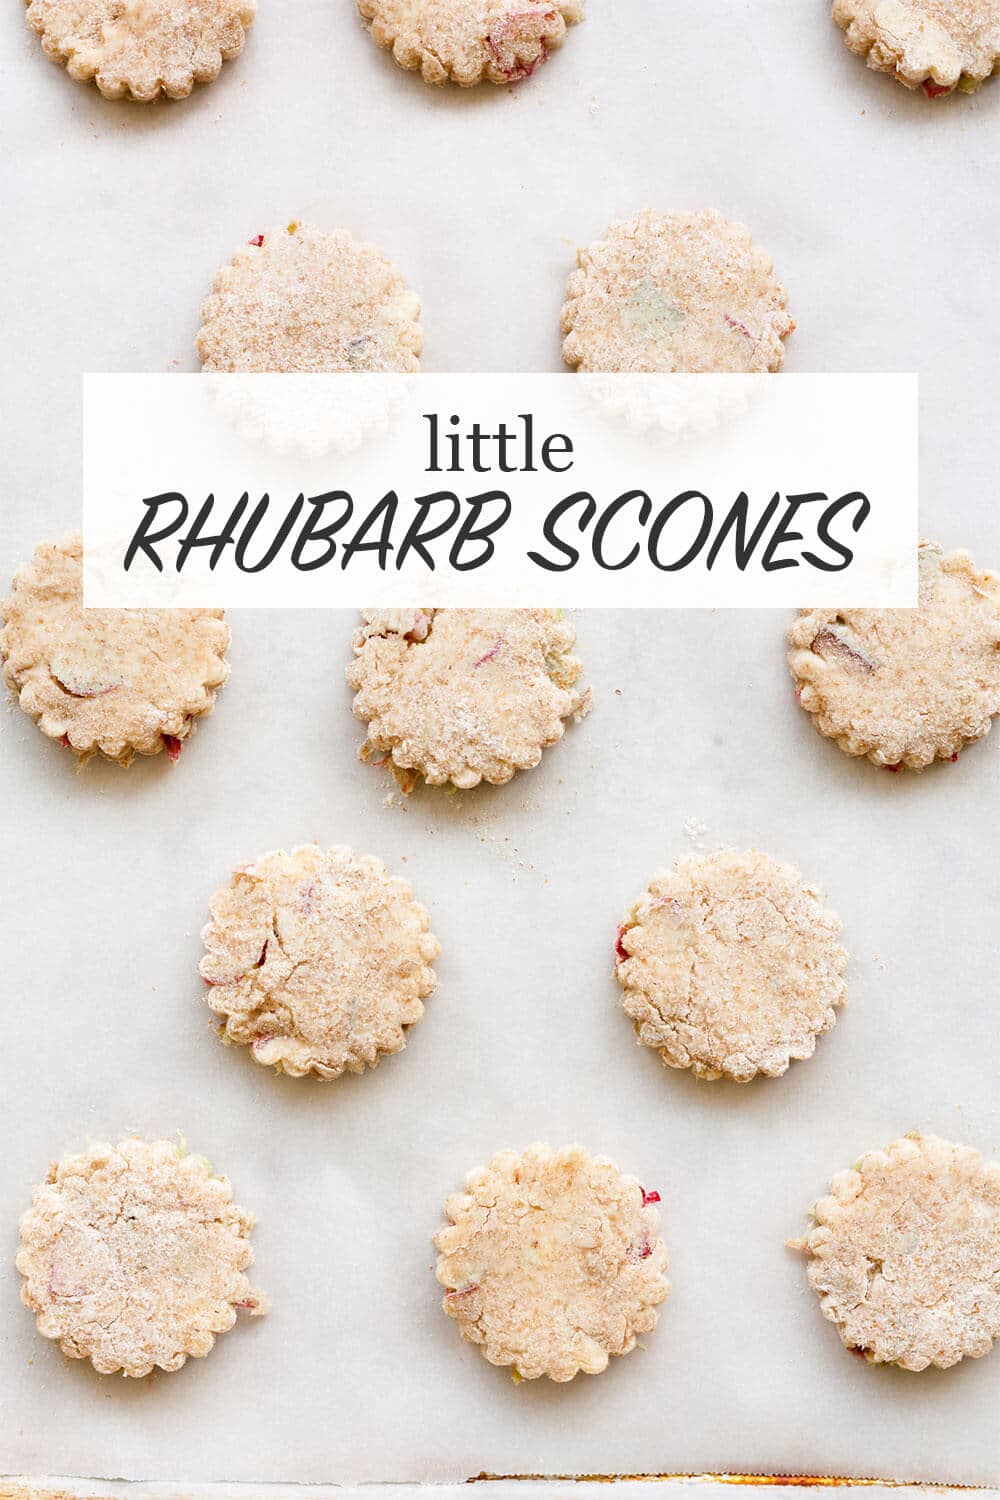 Mini rhubarb scones with crinkle edges before baking on parchment paper lined baking sheet.